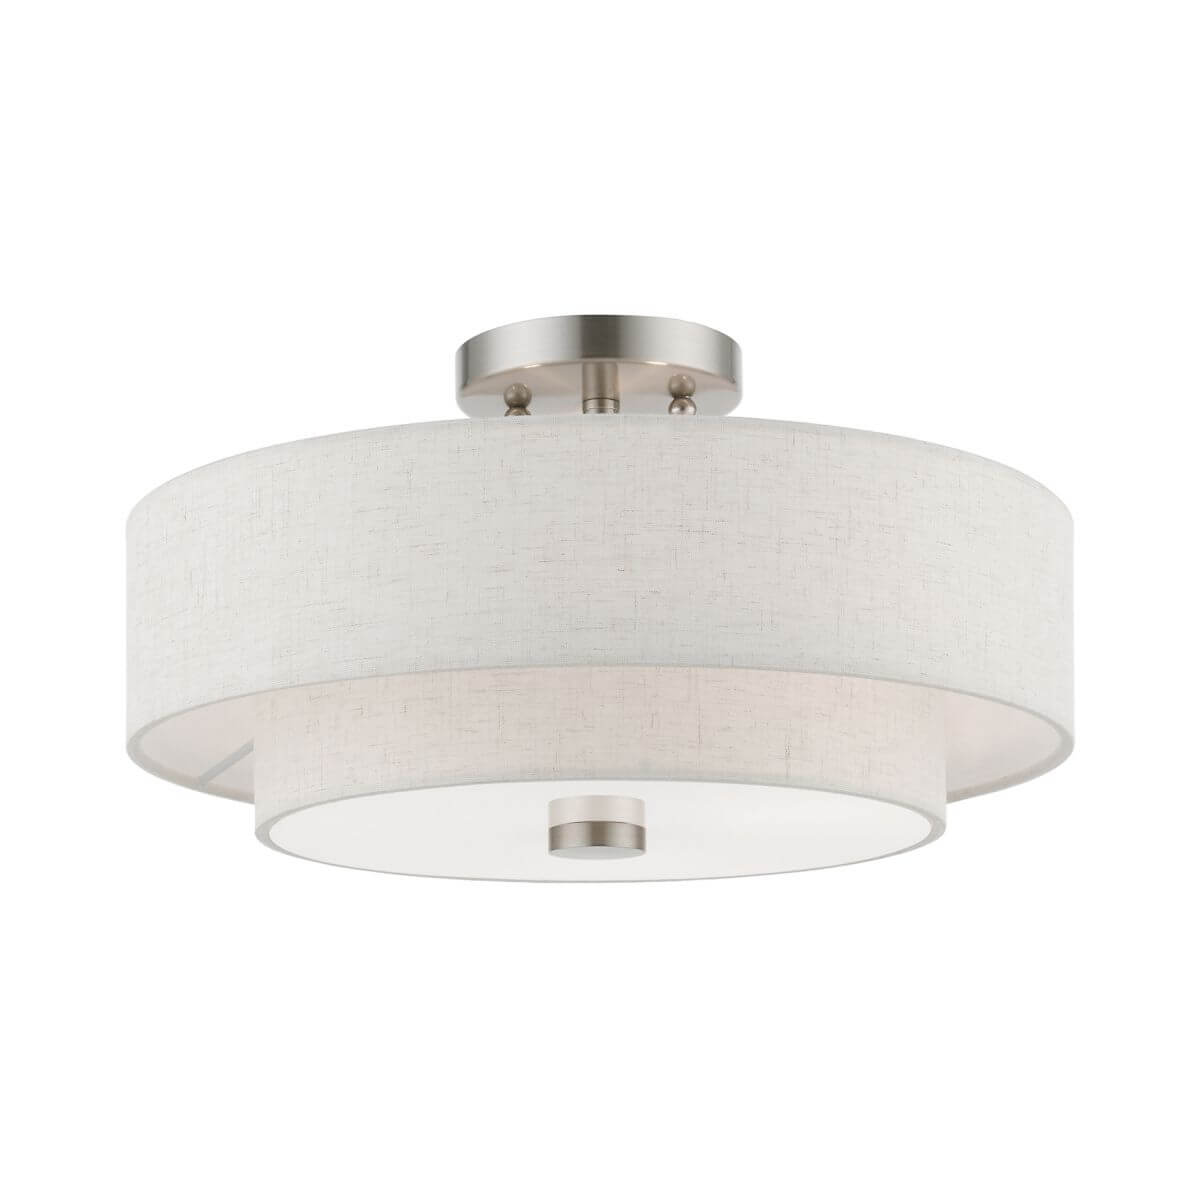 3 Light 15 inch Semi-Flush Mount in Brushed Nickel with Hand Crafted Oatmeal Color Hardback Fabric Shade - White Fabric Inside - 245466